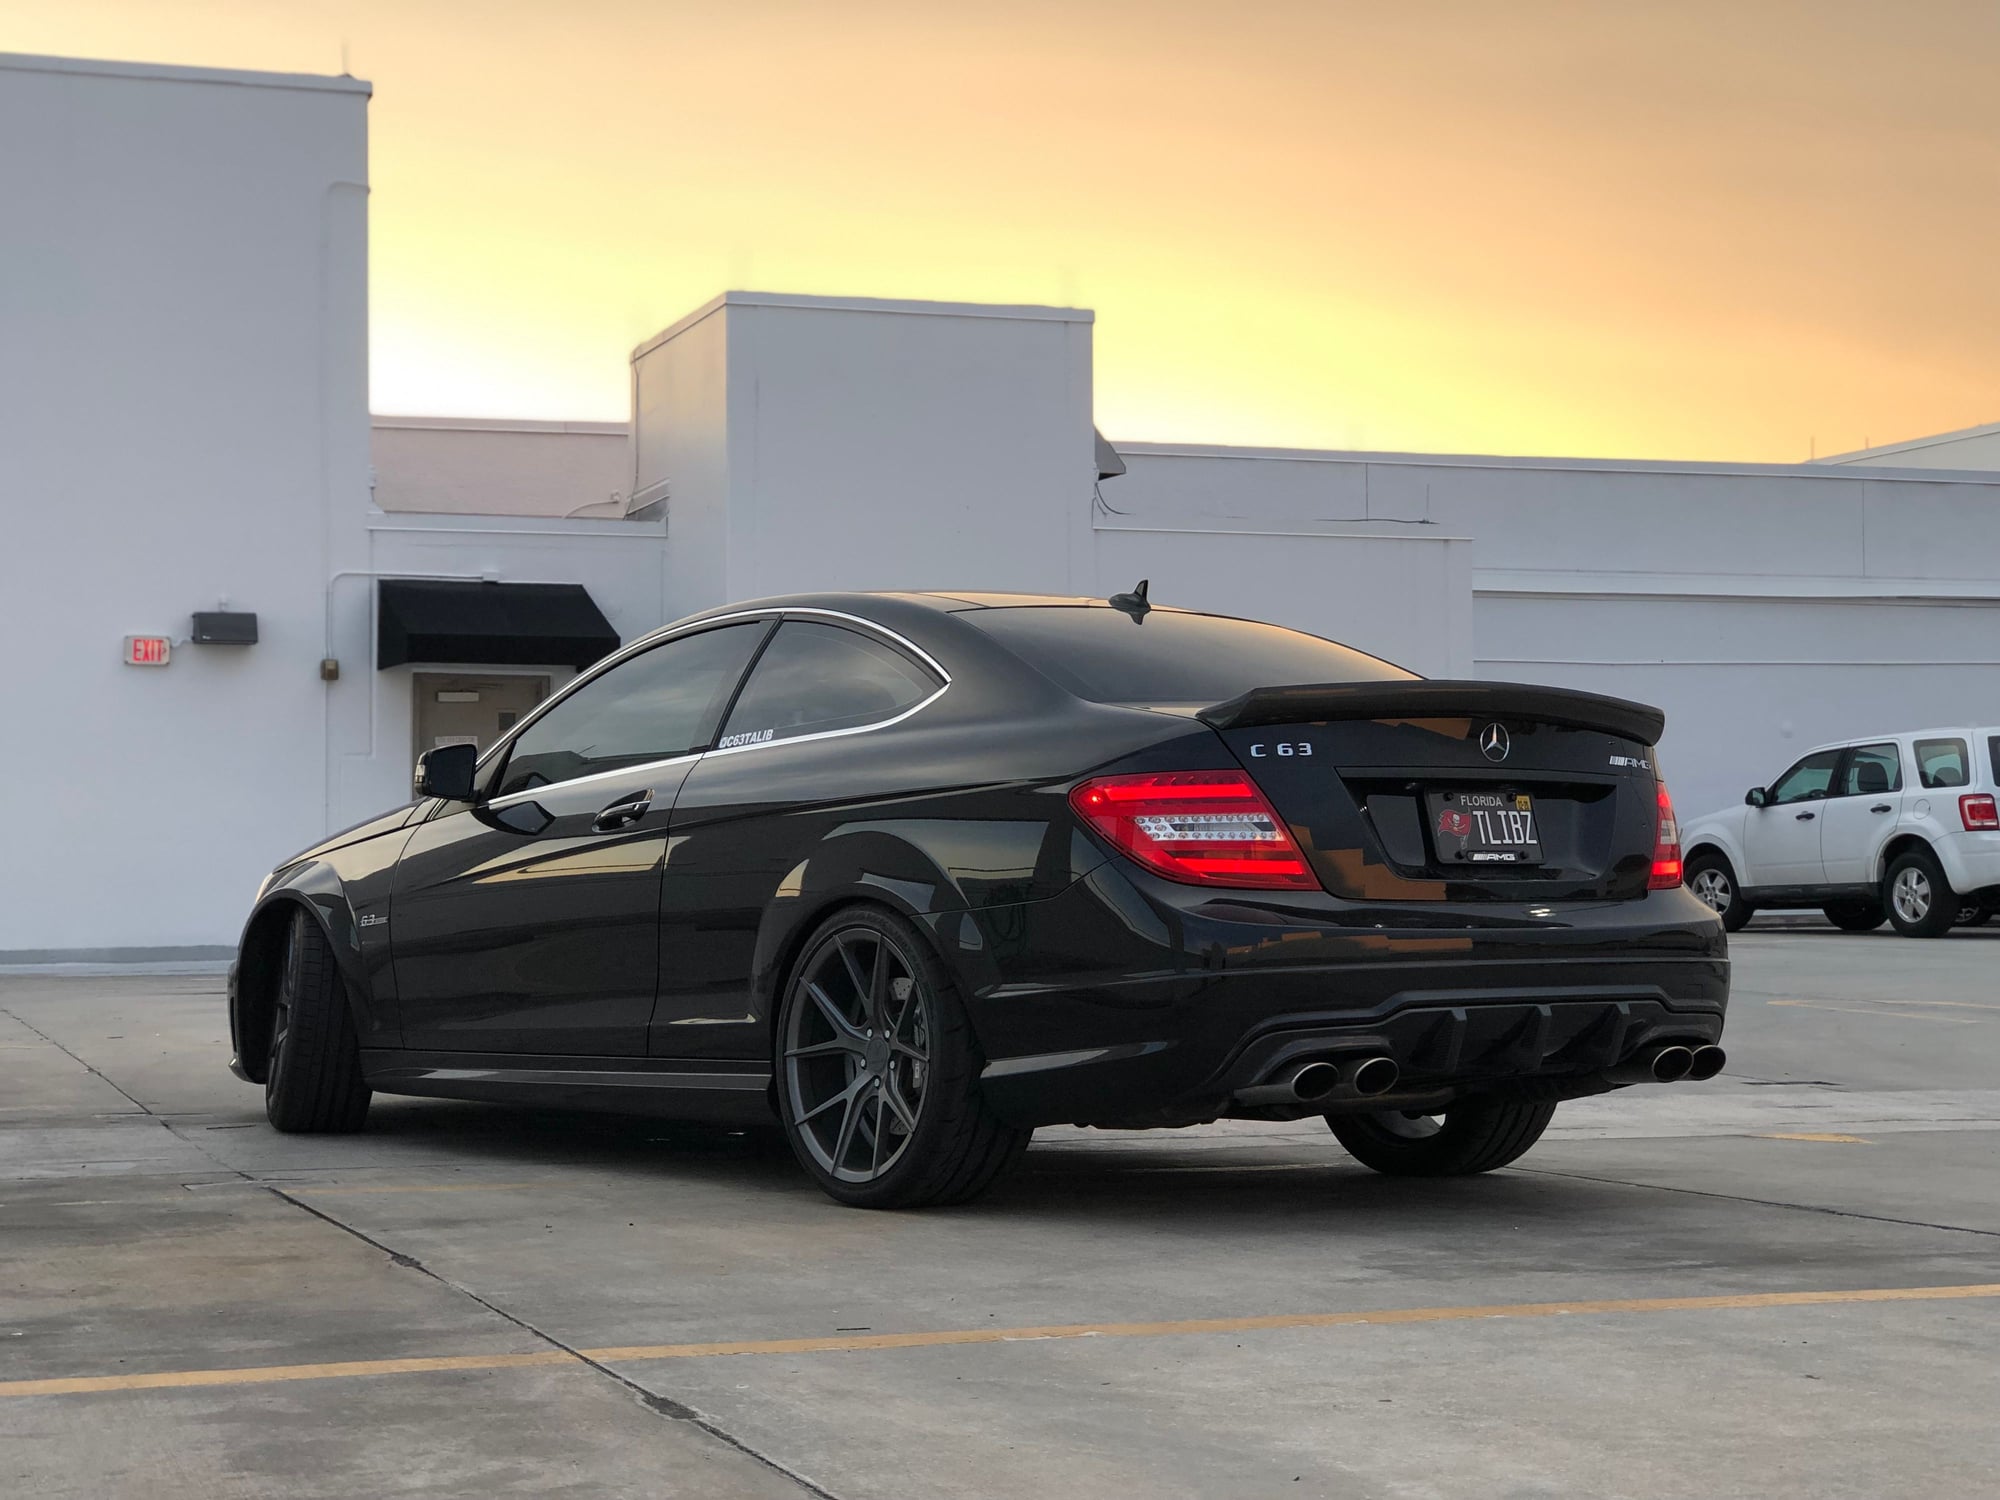 2012 C63 Amg Coupe Tastefully Modified Mbworld Org Forums